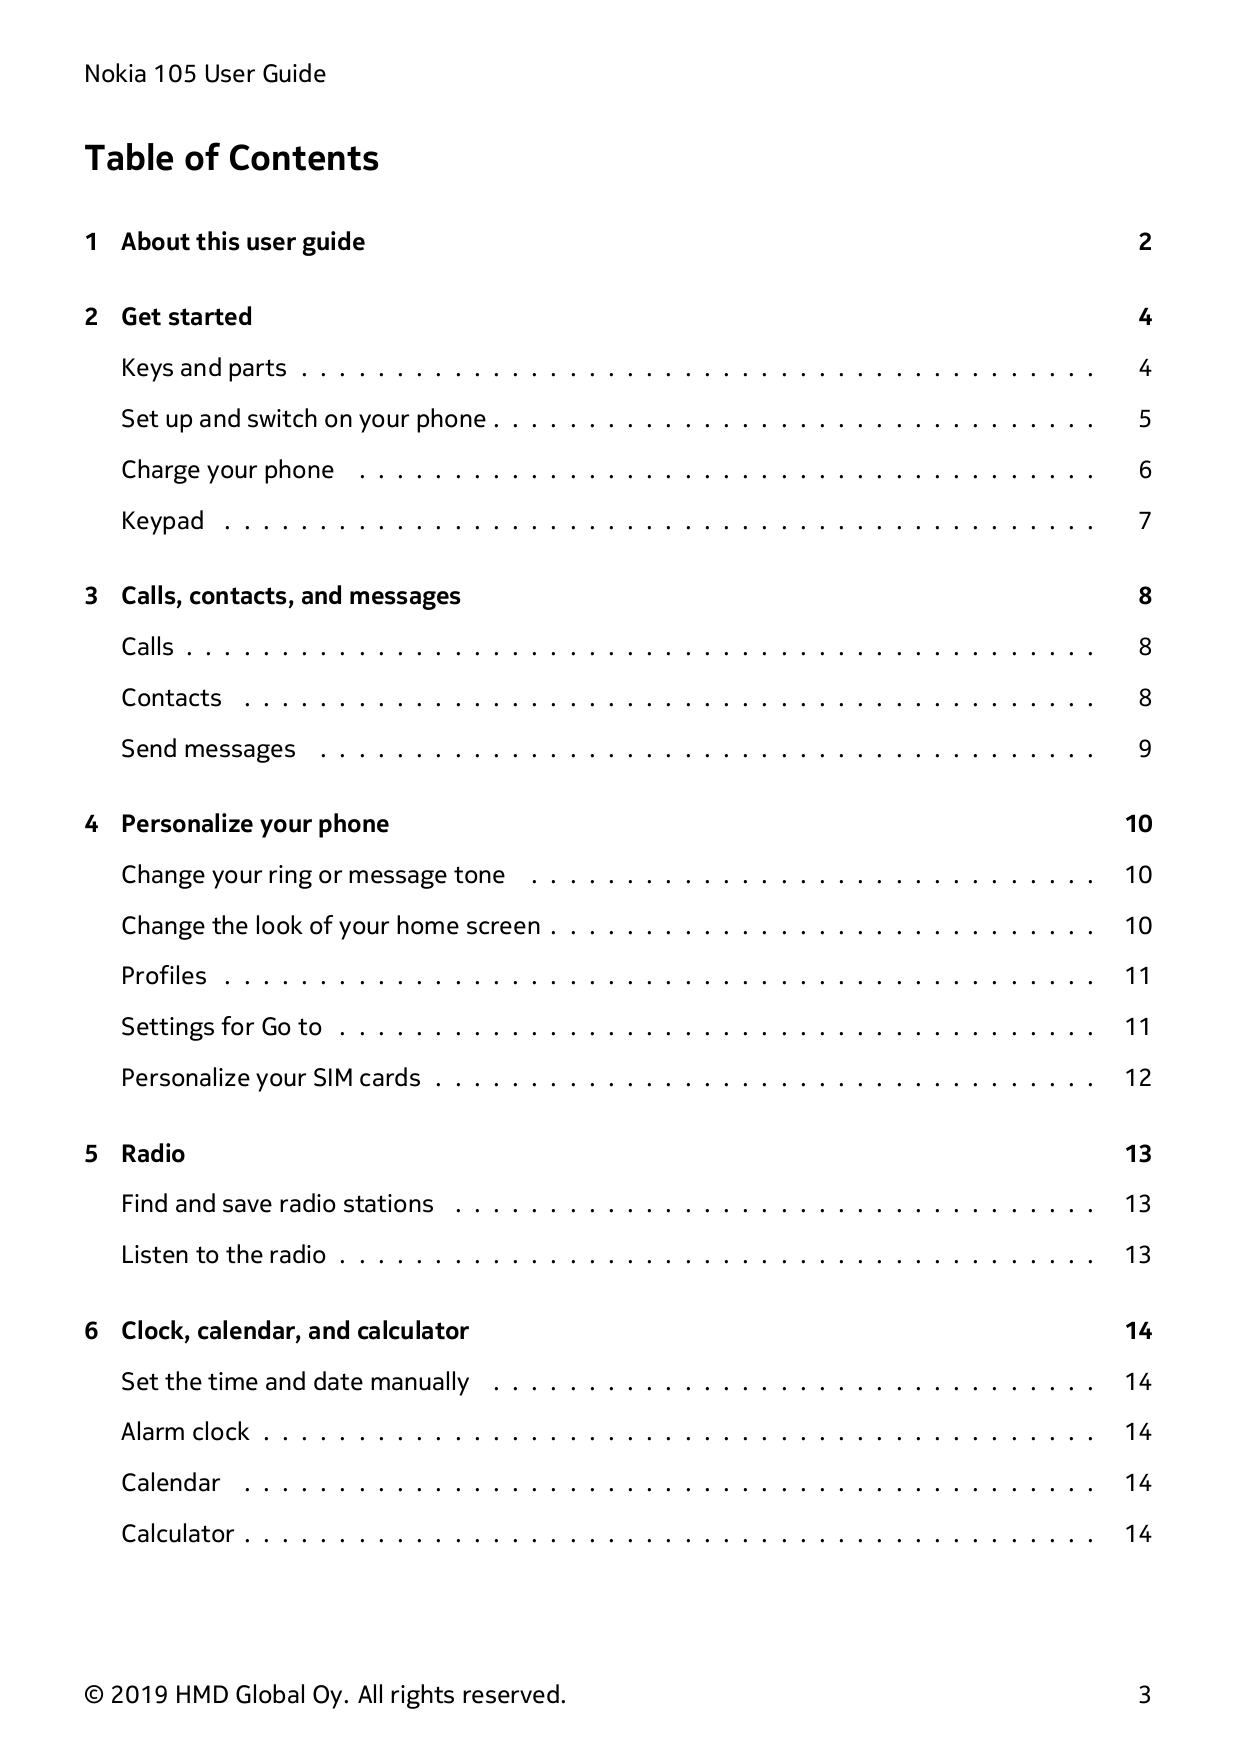 Nokia 105 User GuideTable of Contents1 About this user guide22 Get started4Keys and parts . . . . . . . . . . . . . . . . . . . 